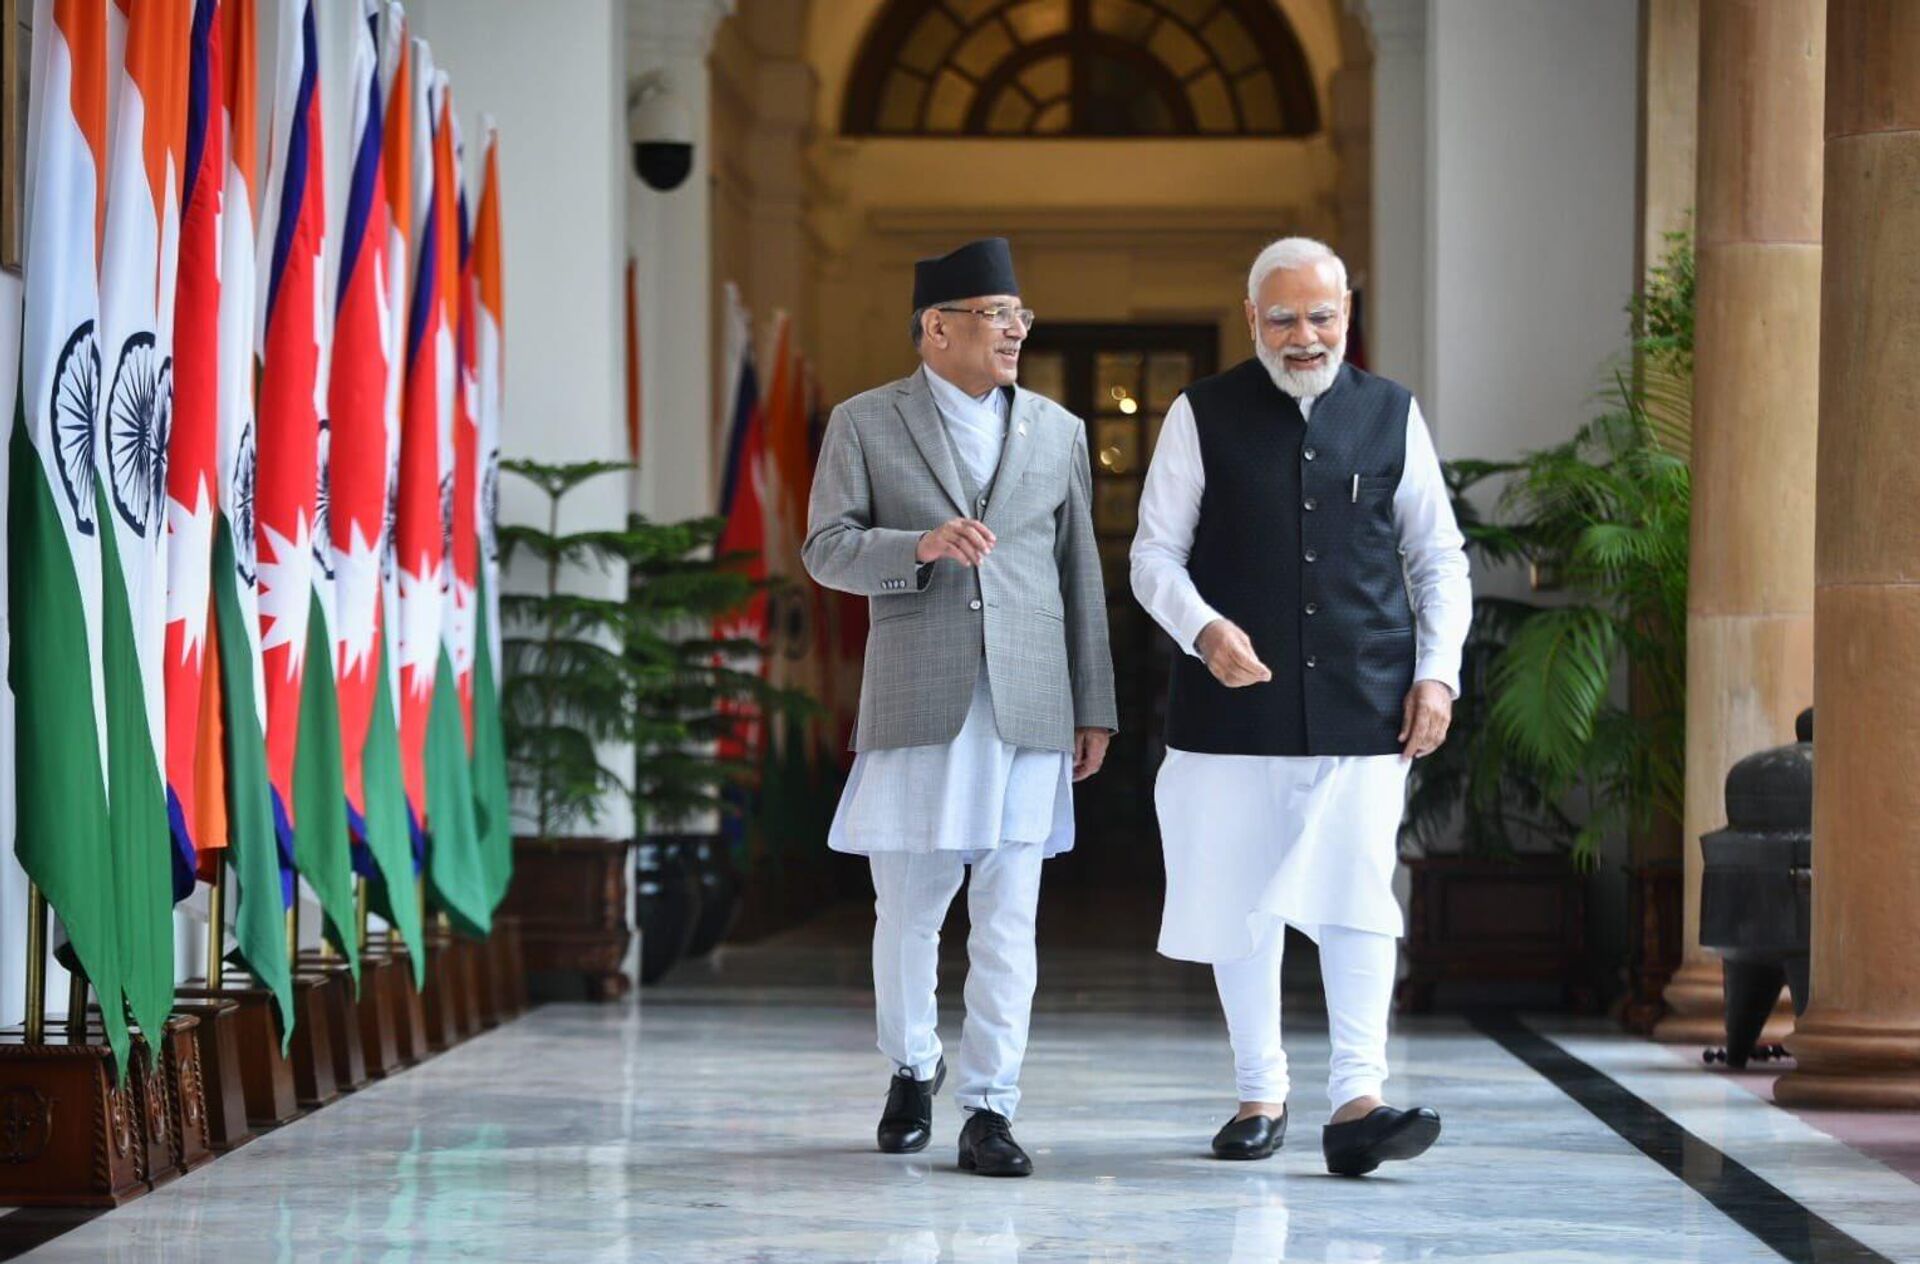 PM Narendra Modi greets PM of Nepal as the latter arrives in Hyderabad House for bilateral talks - Sputnik India, 1920, 28.11.2023